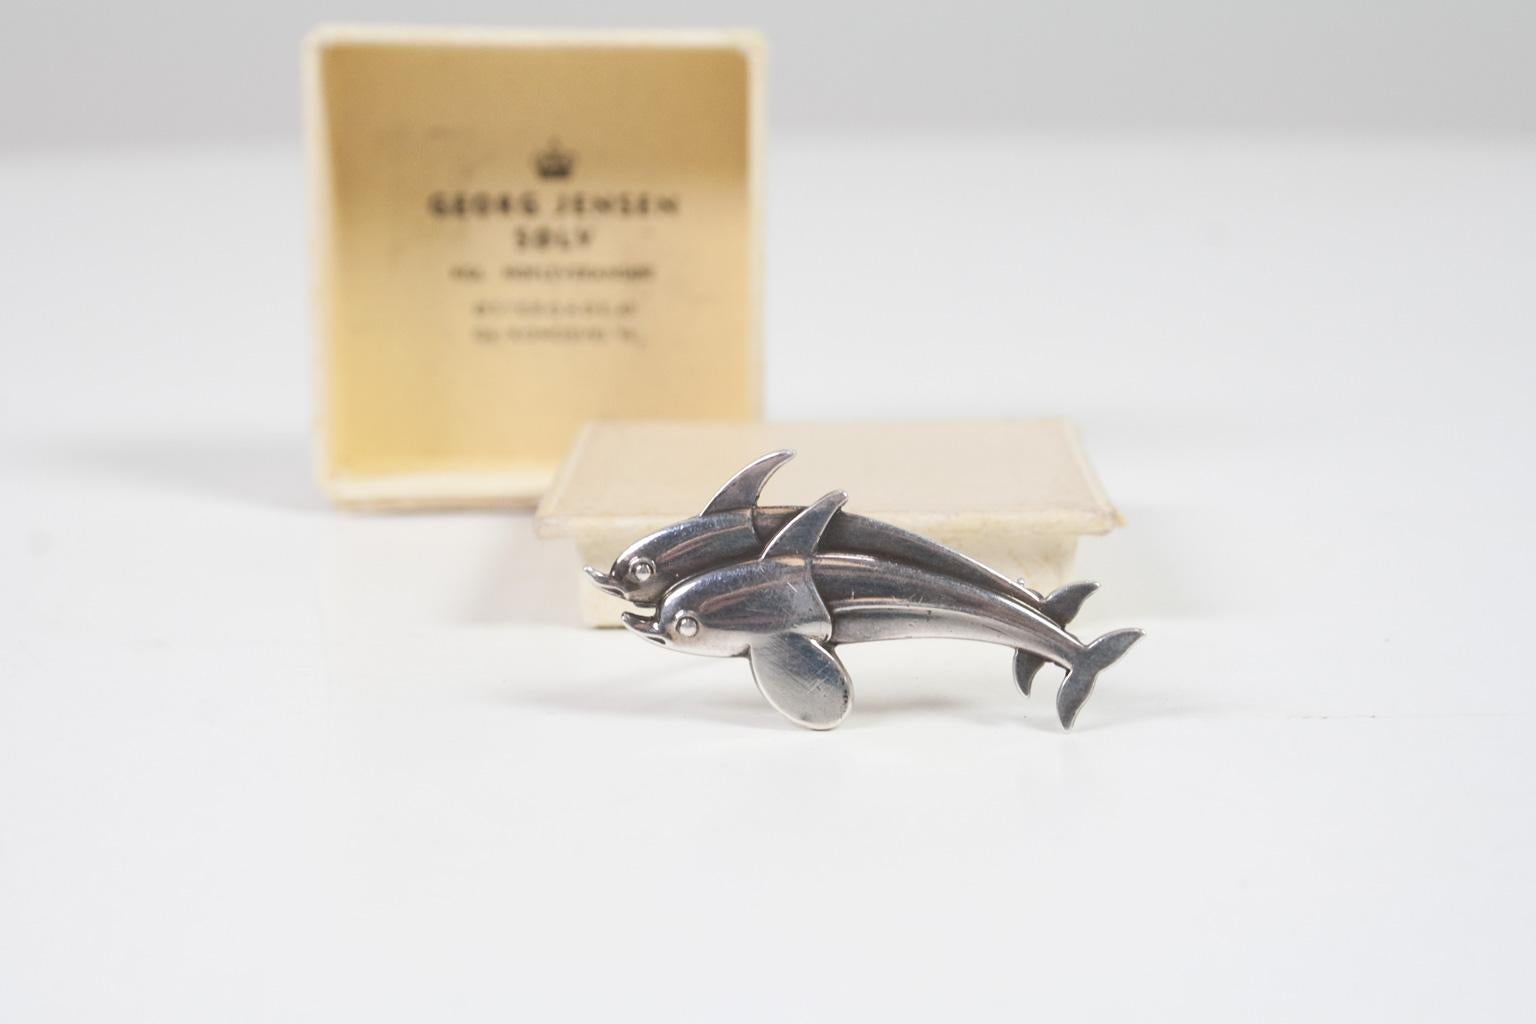 A cute vintage double dolphin brooch from George Jensen. This Scandinavian Modern sterling silver jewellery is designed by Harald Nielsen for George Jensen, with mark of George Jensen (after 1945). The brooch is in the original box. This vintage